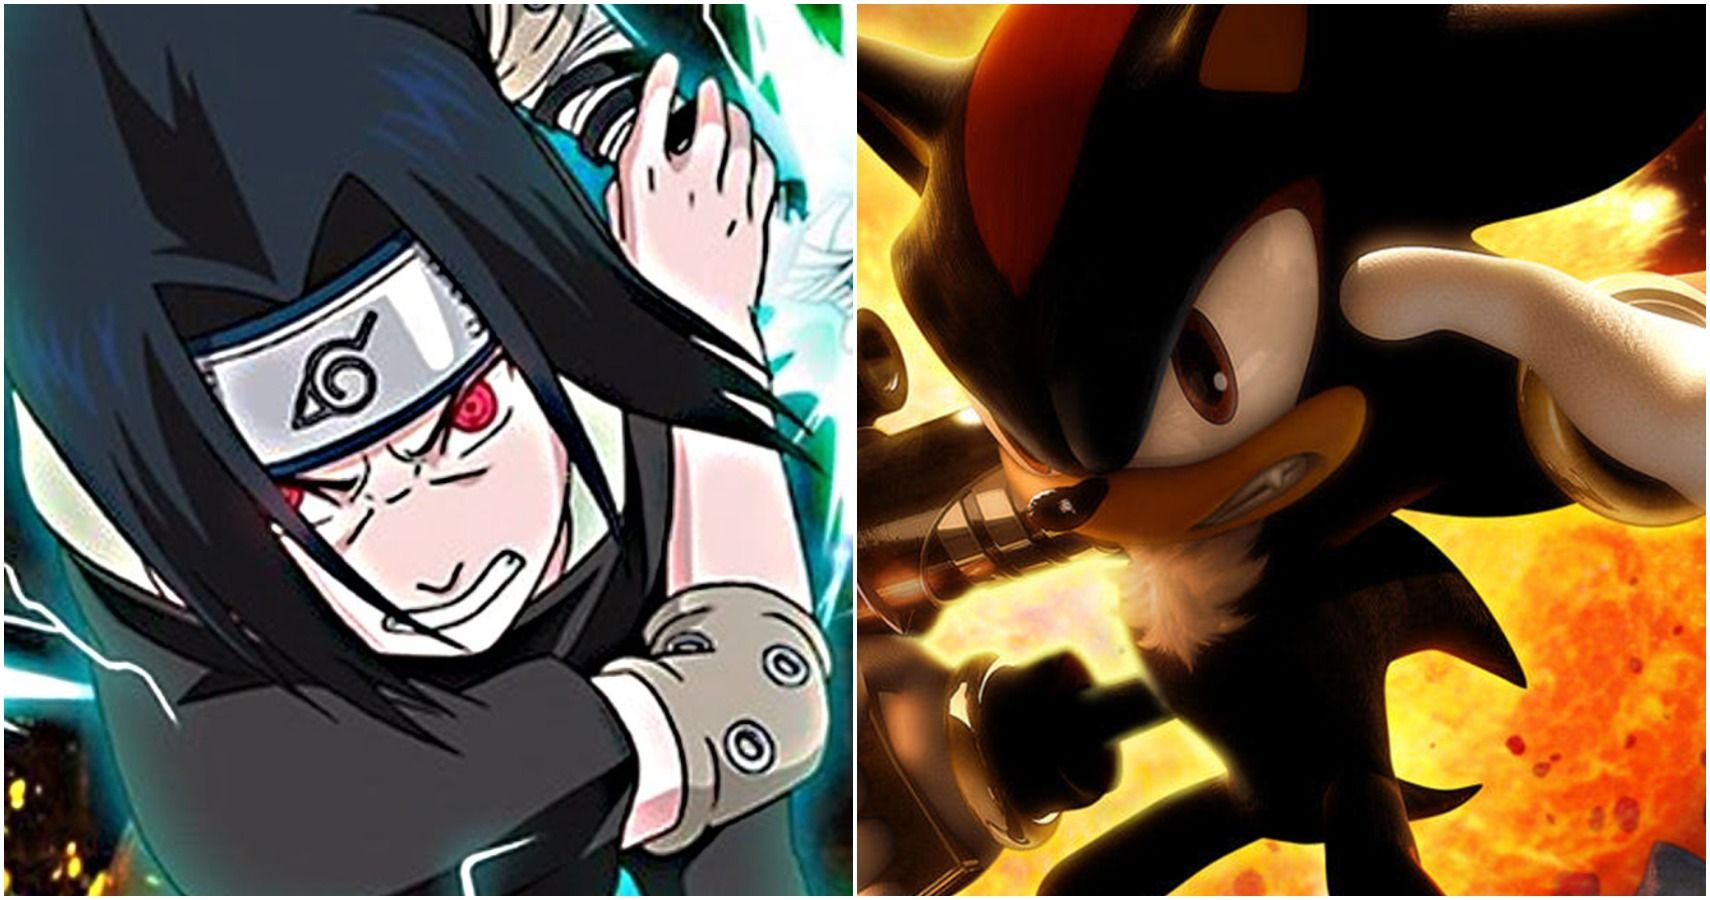 Top 10 Edgy Anime Characters That Defined Our Childhoods | CBR